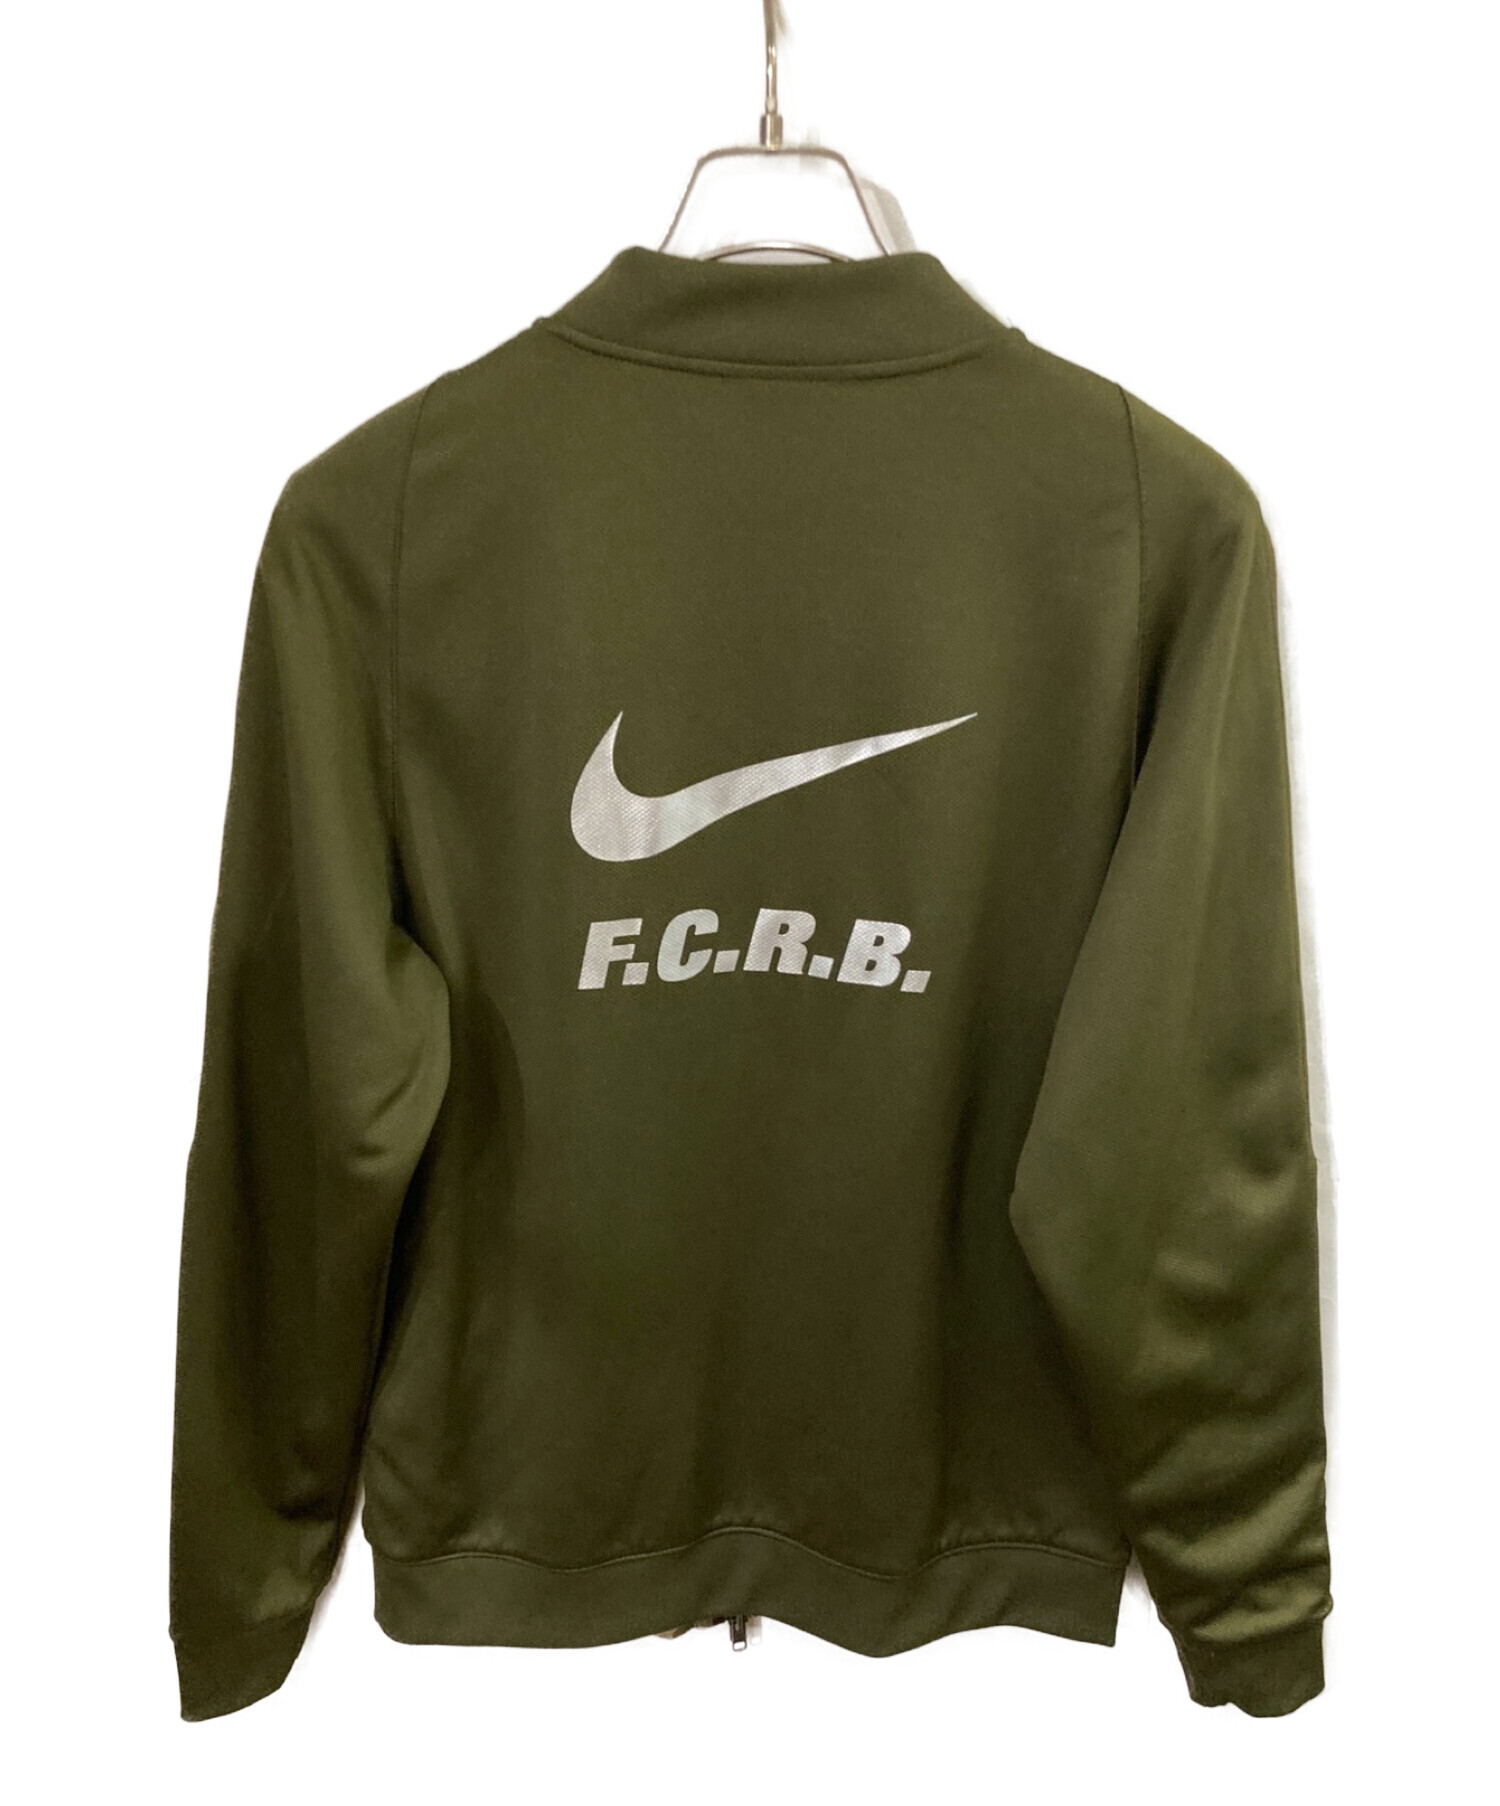 FCRB×NIKE REVERSIBLE KNIT WARM UP JACKET